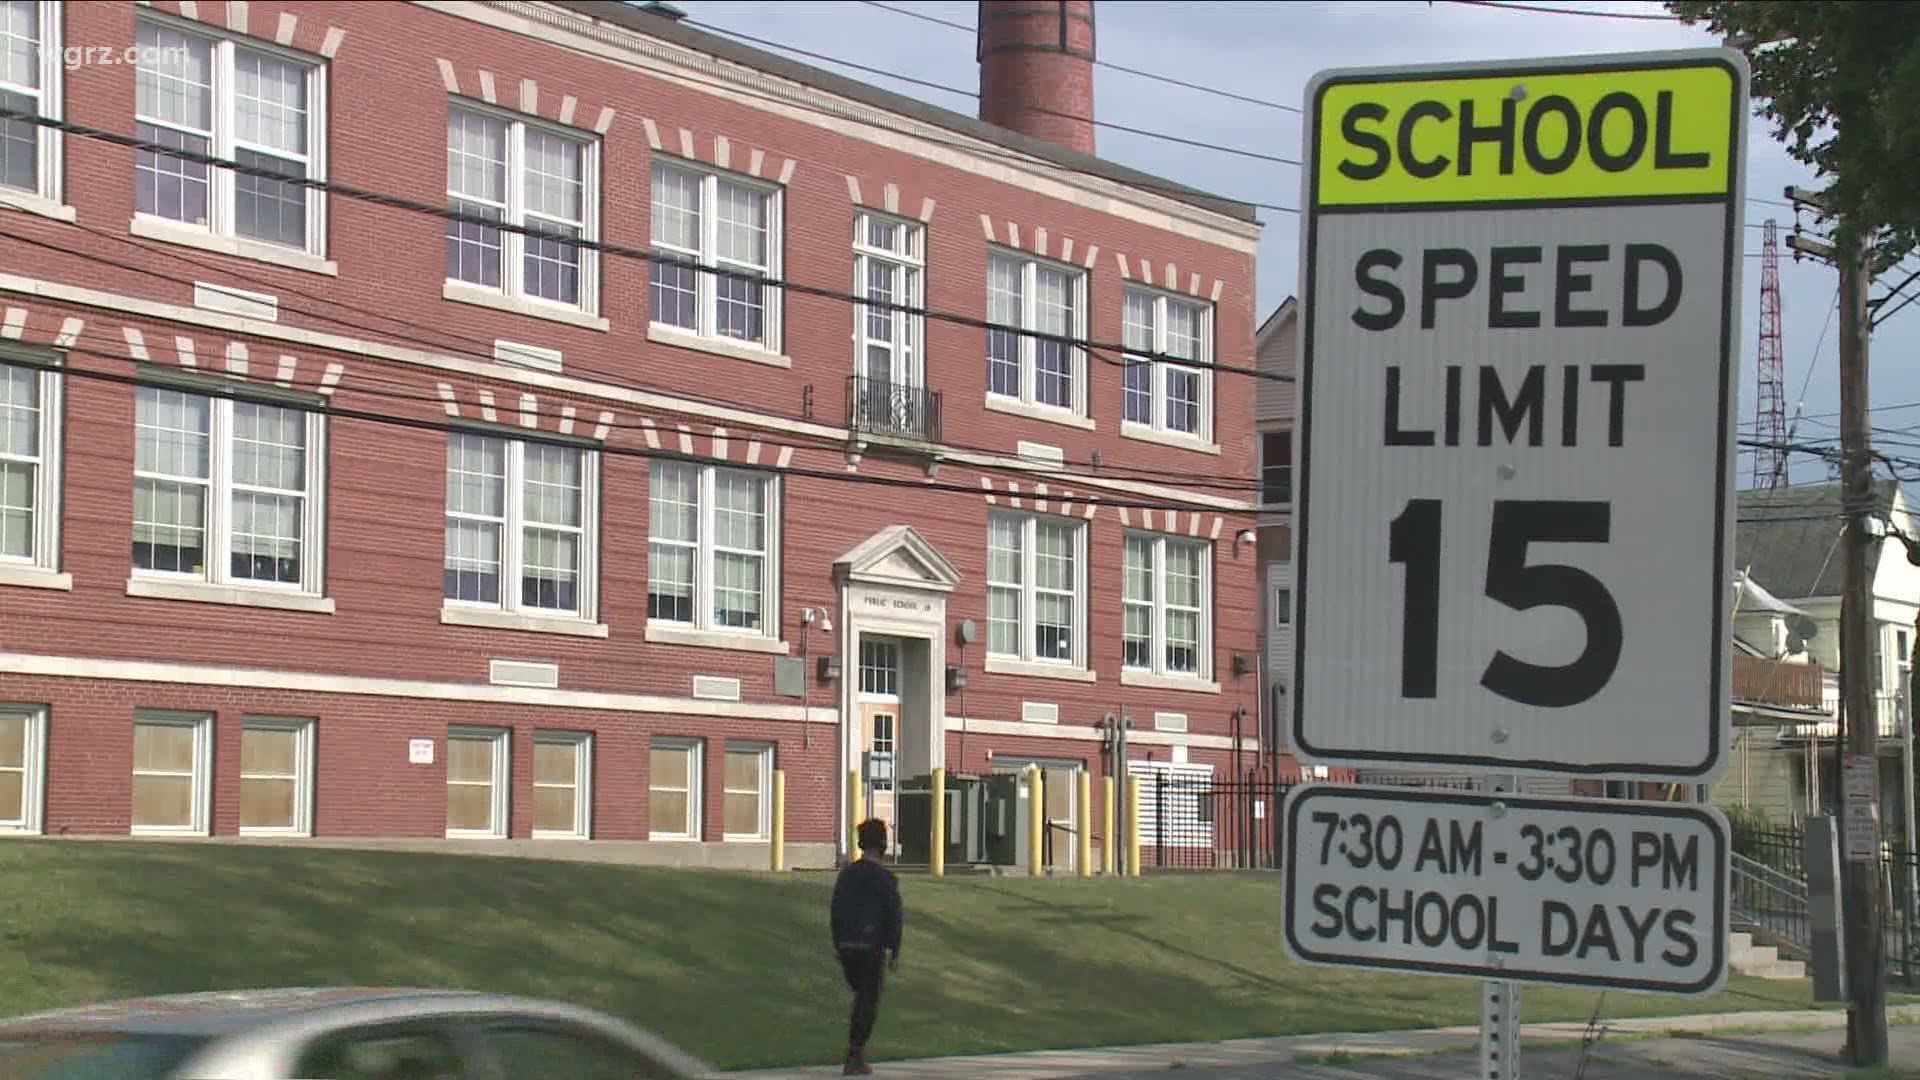 School districts have until the end of the month to submit their school reopening plans to New York State.